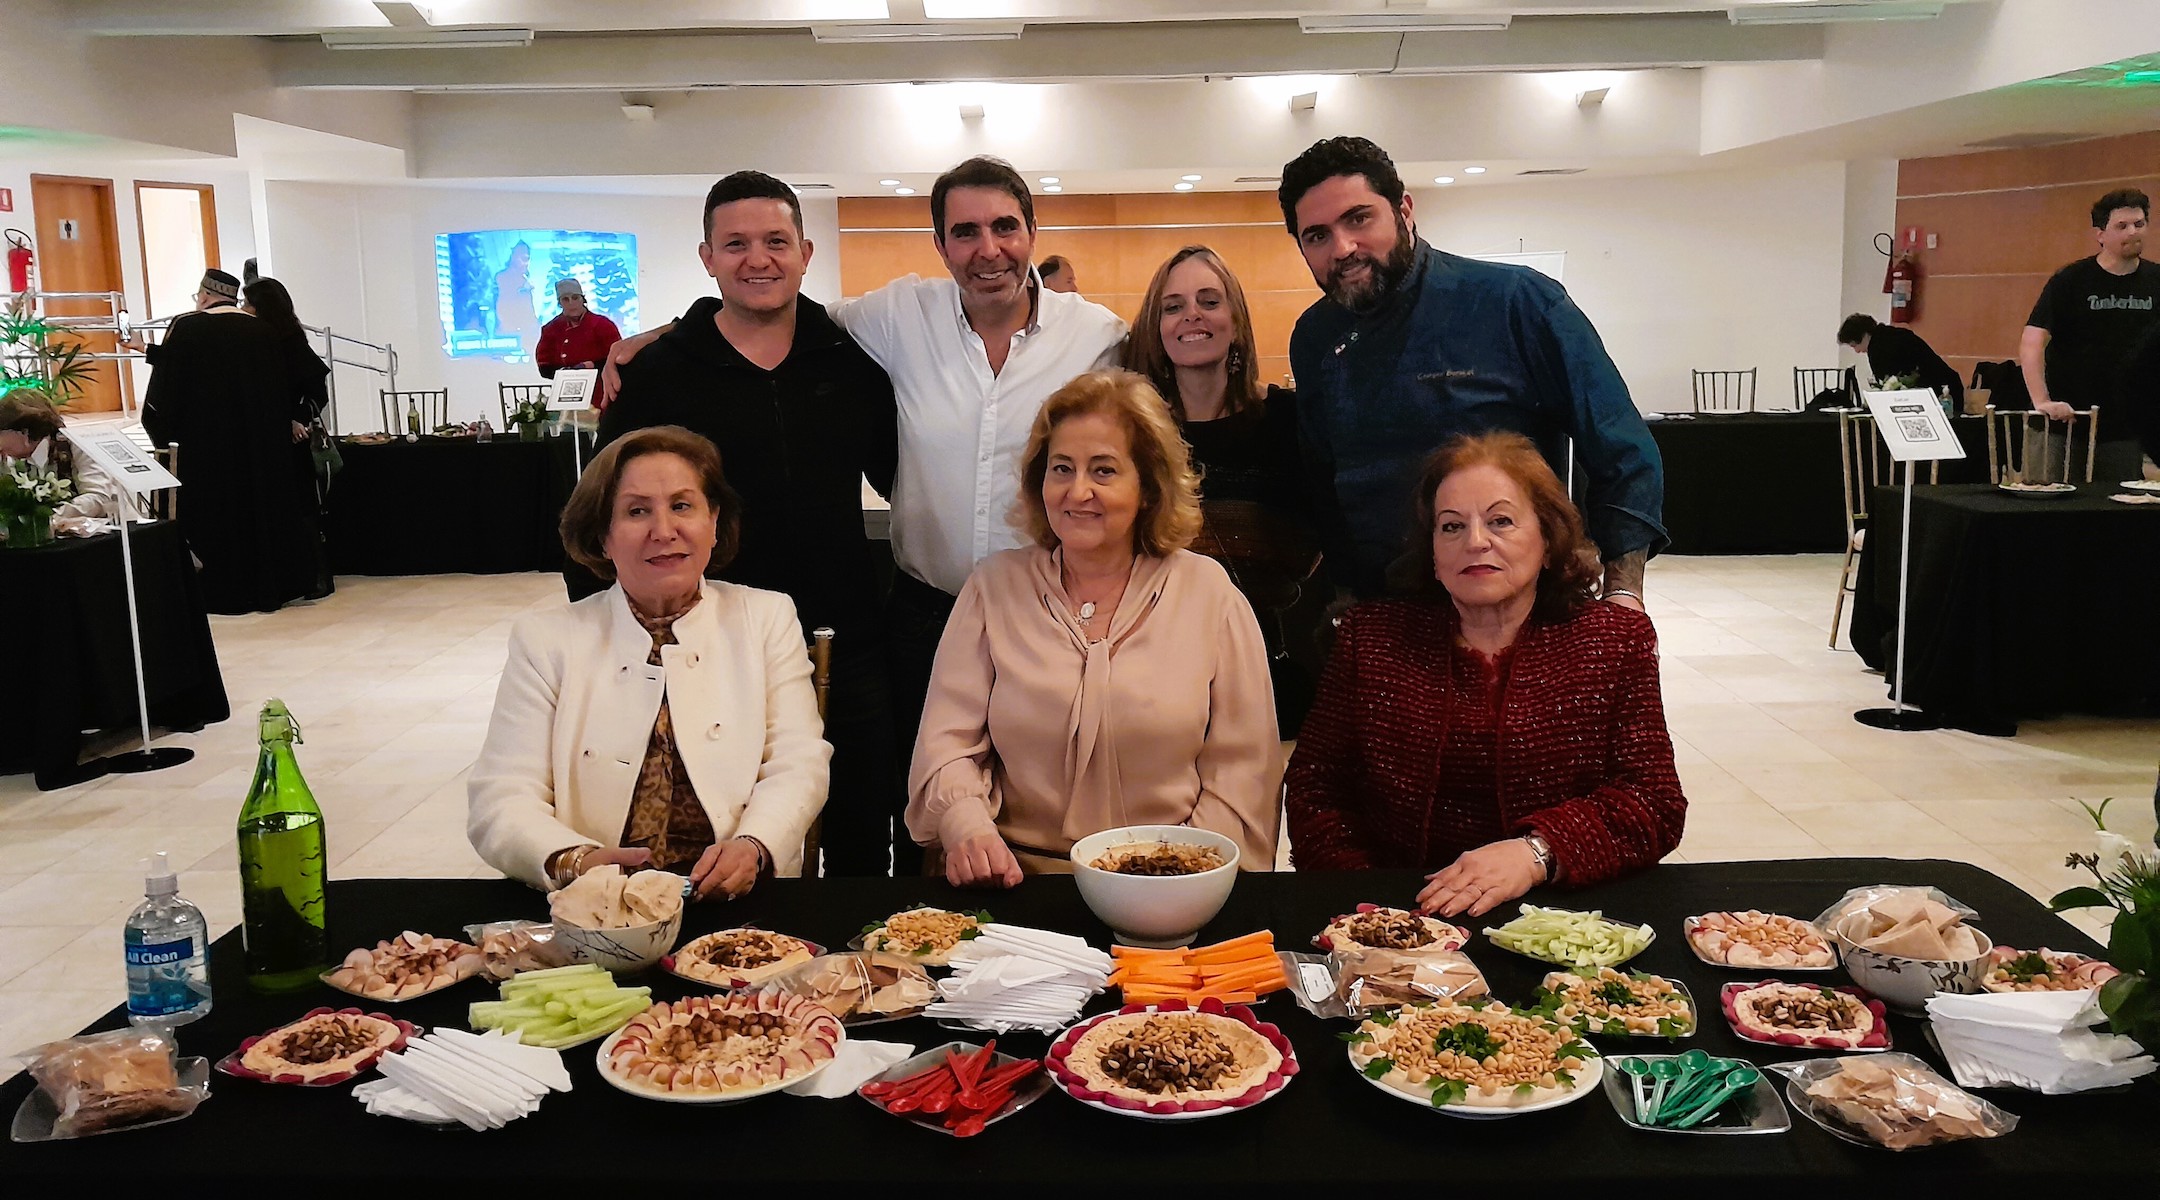 A team of three Christian Arab Brazilians, seated in front, won first place at the inaugural Abrahamic Hummus Championship in Sao Paulo, Brazil, Sept. 21, 2022. (Courtesy of Hebraica Sao Paulo)